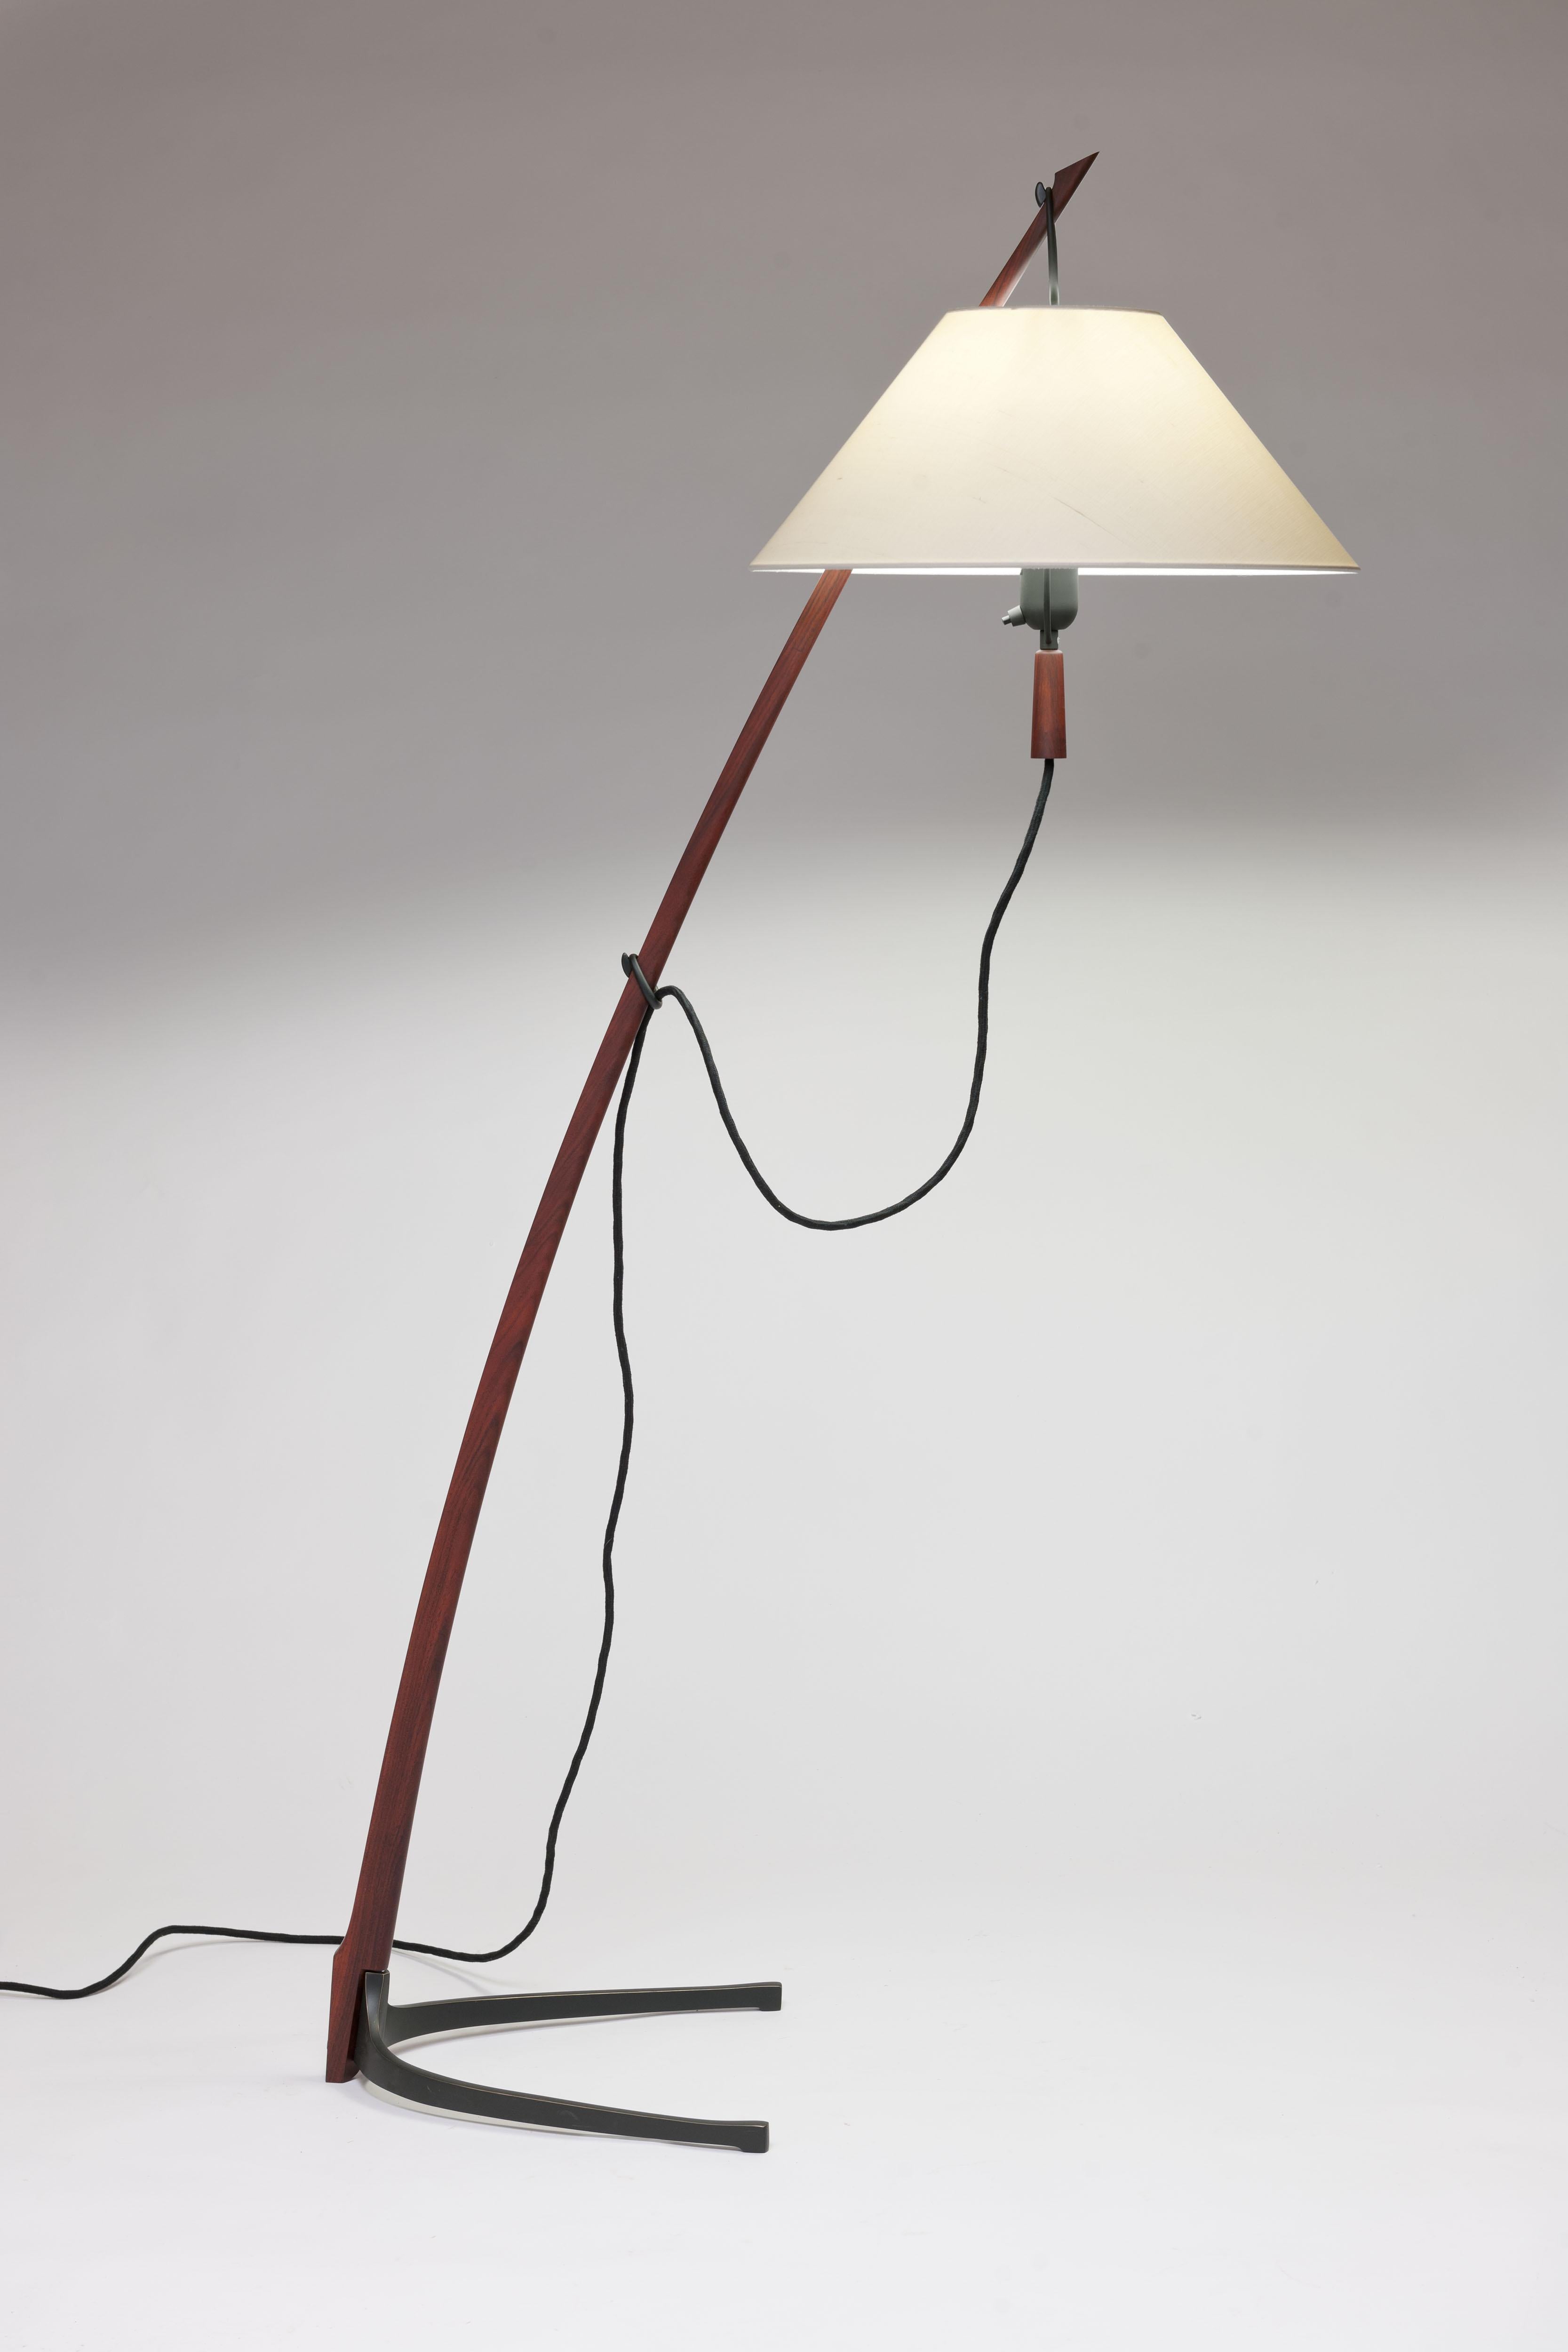 All new, contemporary edition of J.T. Kalmar's iconic 'Dornstab' design from 1947 in exclusive hardwood (Paul Ferro) or Wenge & bronzed brass base with silk fabric lamp shade. Made at original manufacturer Kalmar Werkstätten in Austria. 

The solid